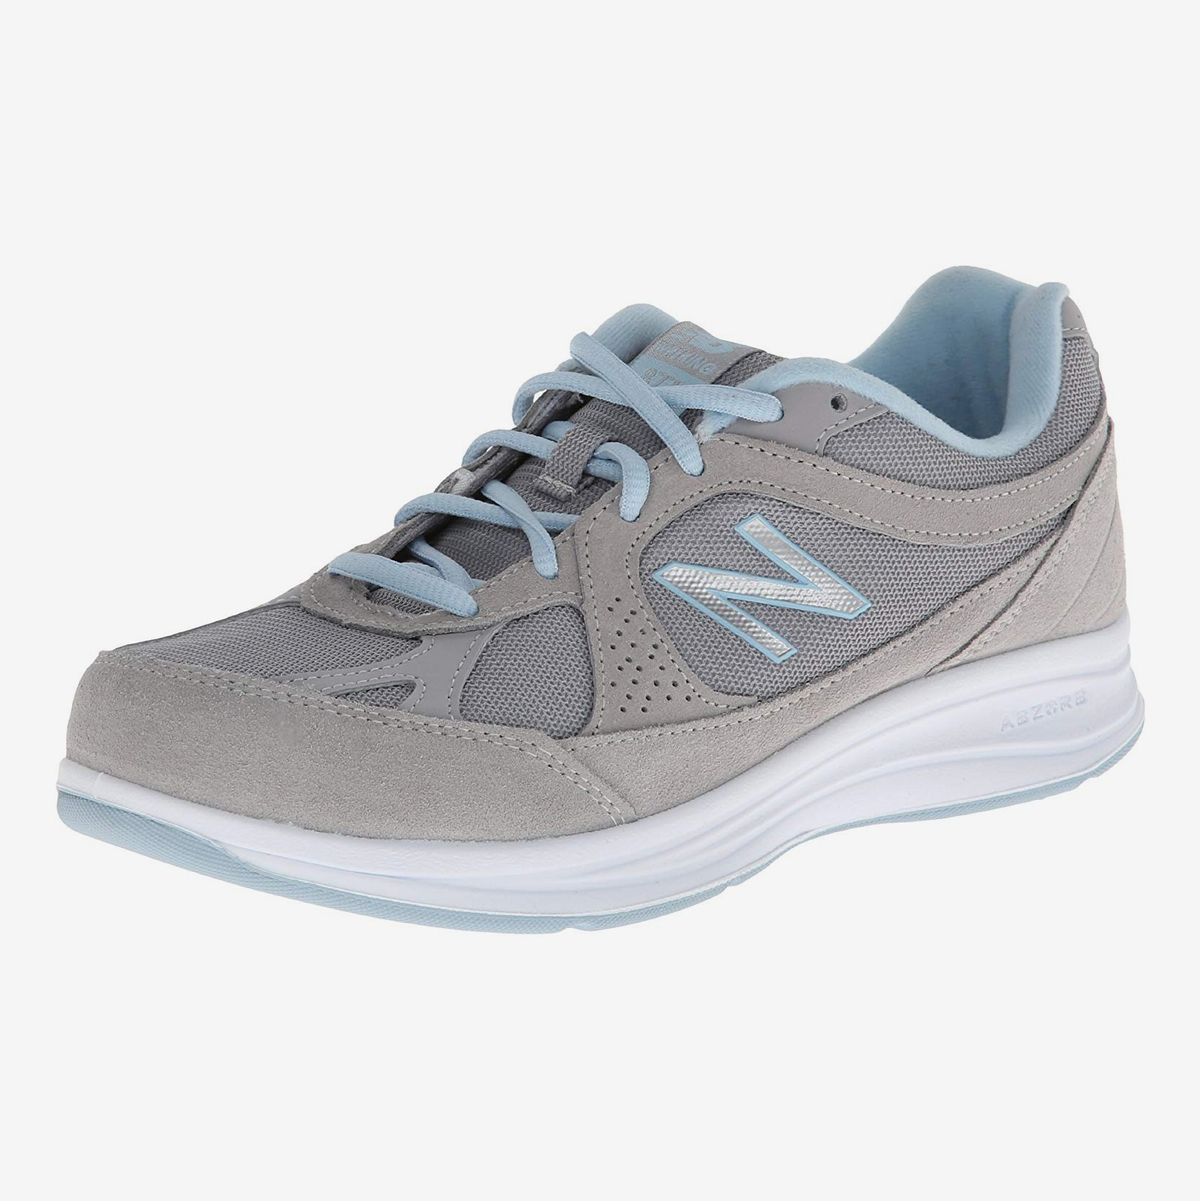 lightweight walking shoes with good arch support